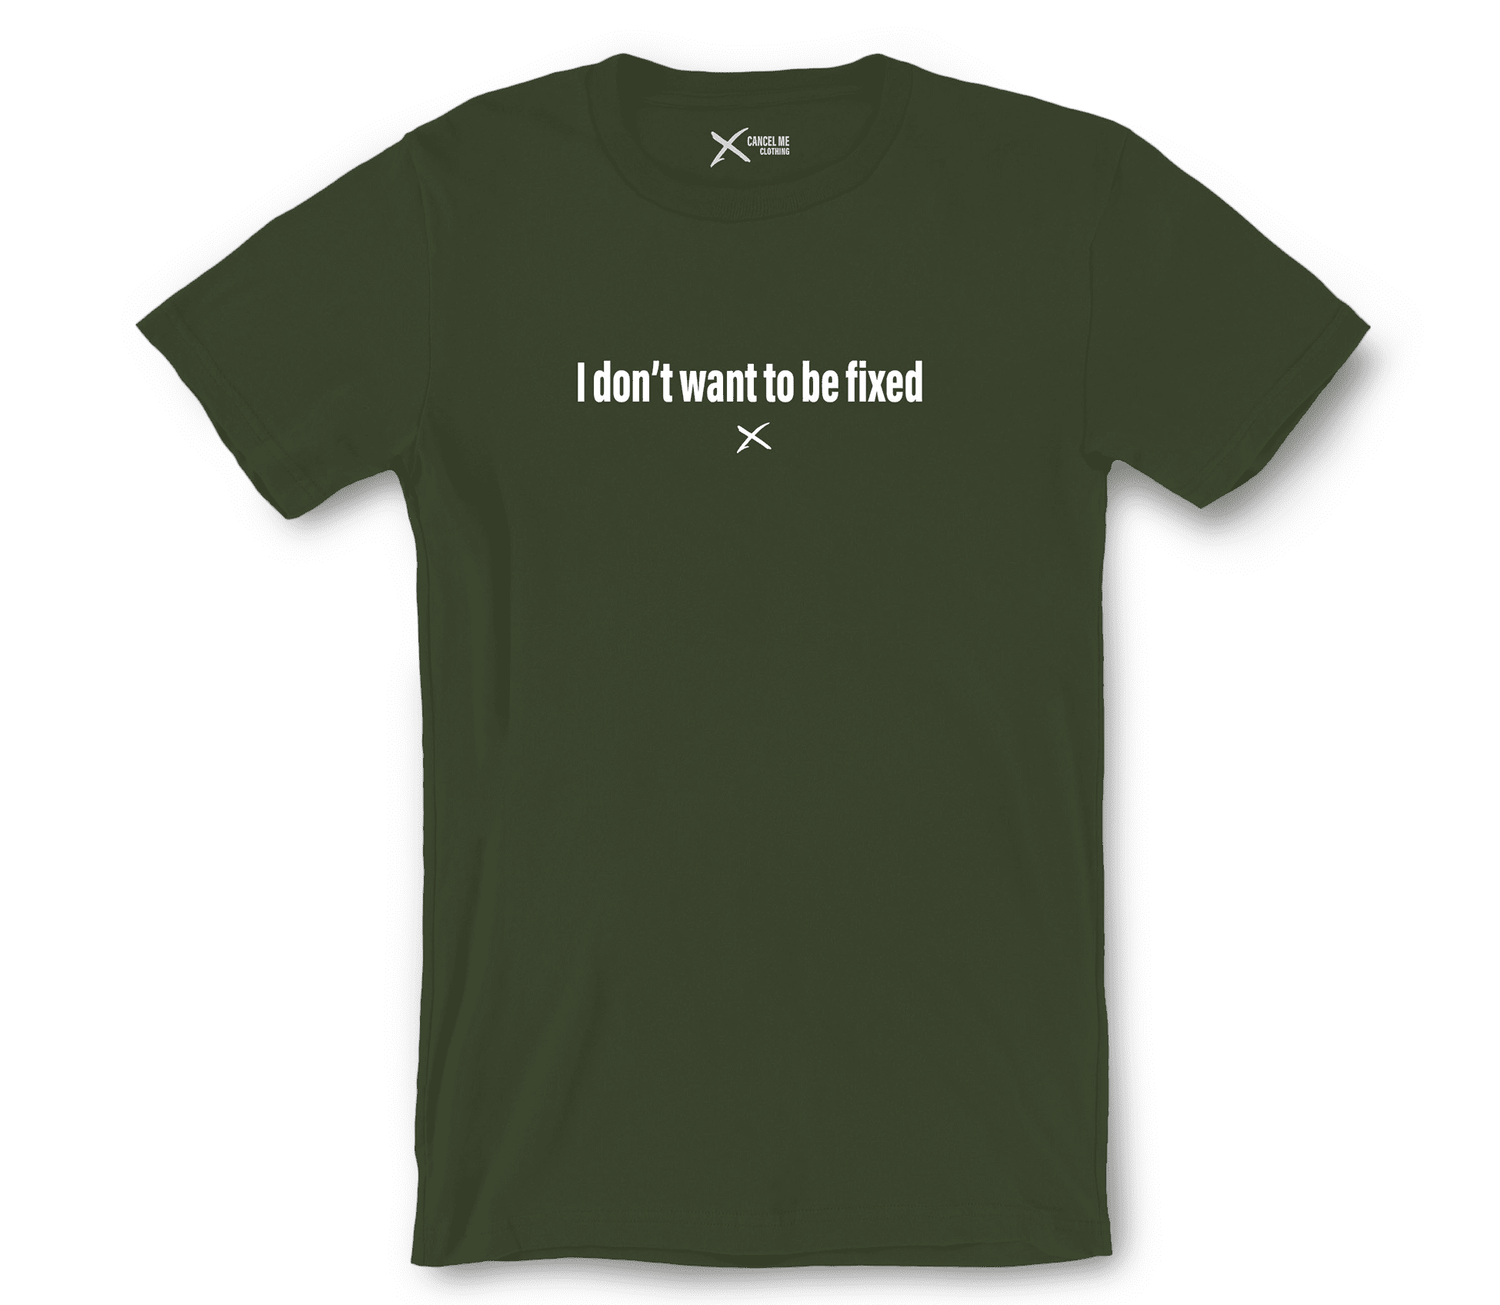 lp-mental_health_1-shirt_7791721513130_i-dont-want-to-be-fixed-shirt_Military Green.png